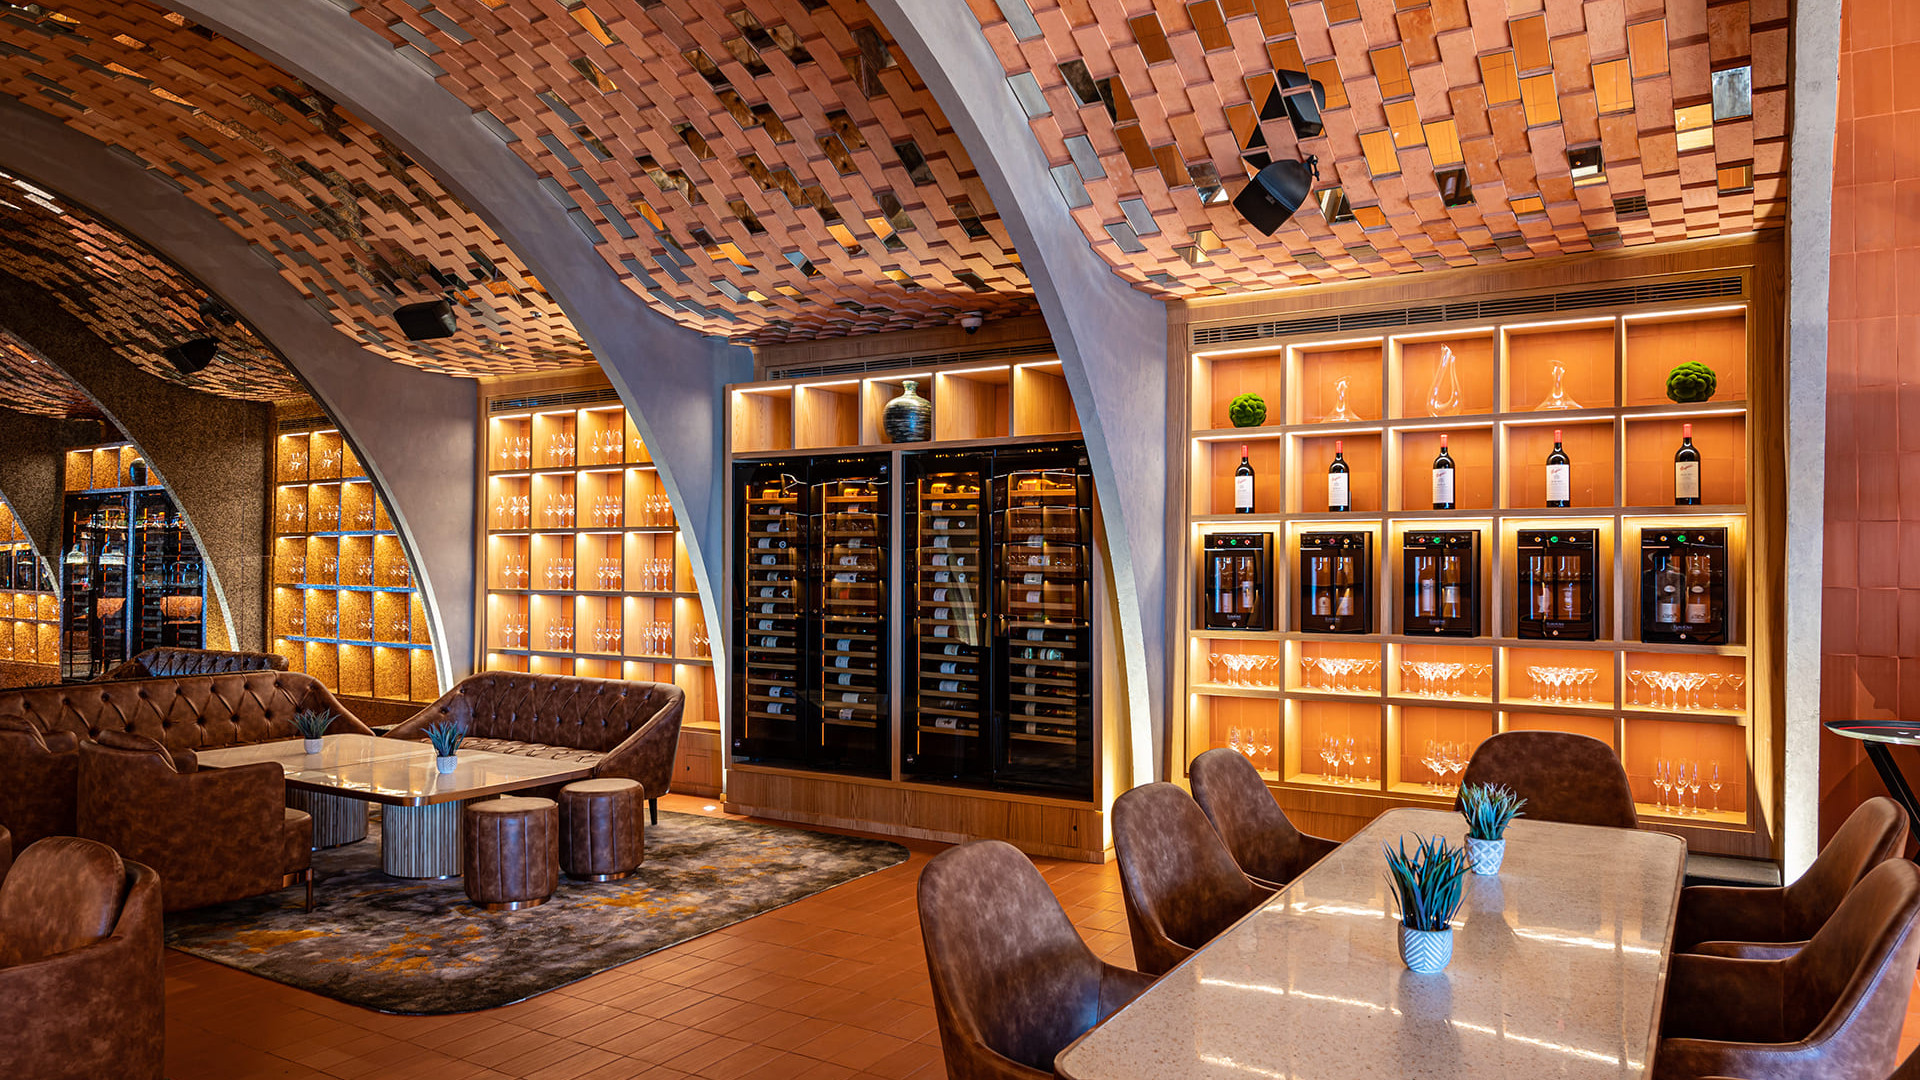 Realization of a restaurant architecture project integrating EuroCave wine cabinets and EuroCave wine by the glass solutions. Restaurant and bar design ideas.